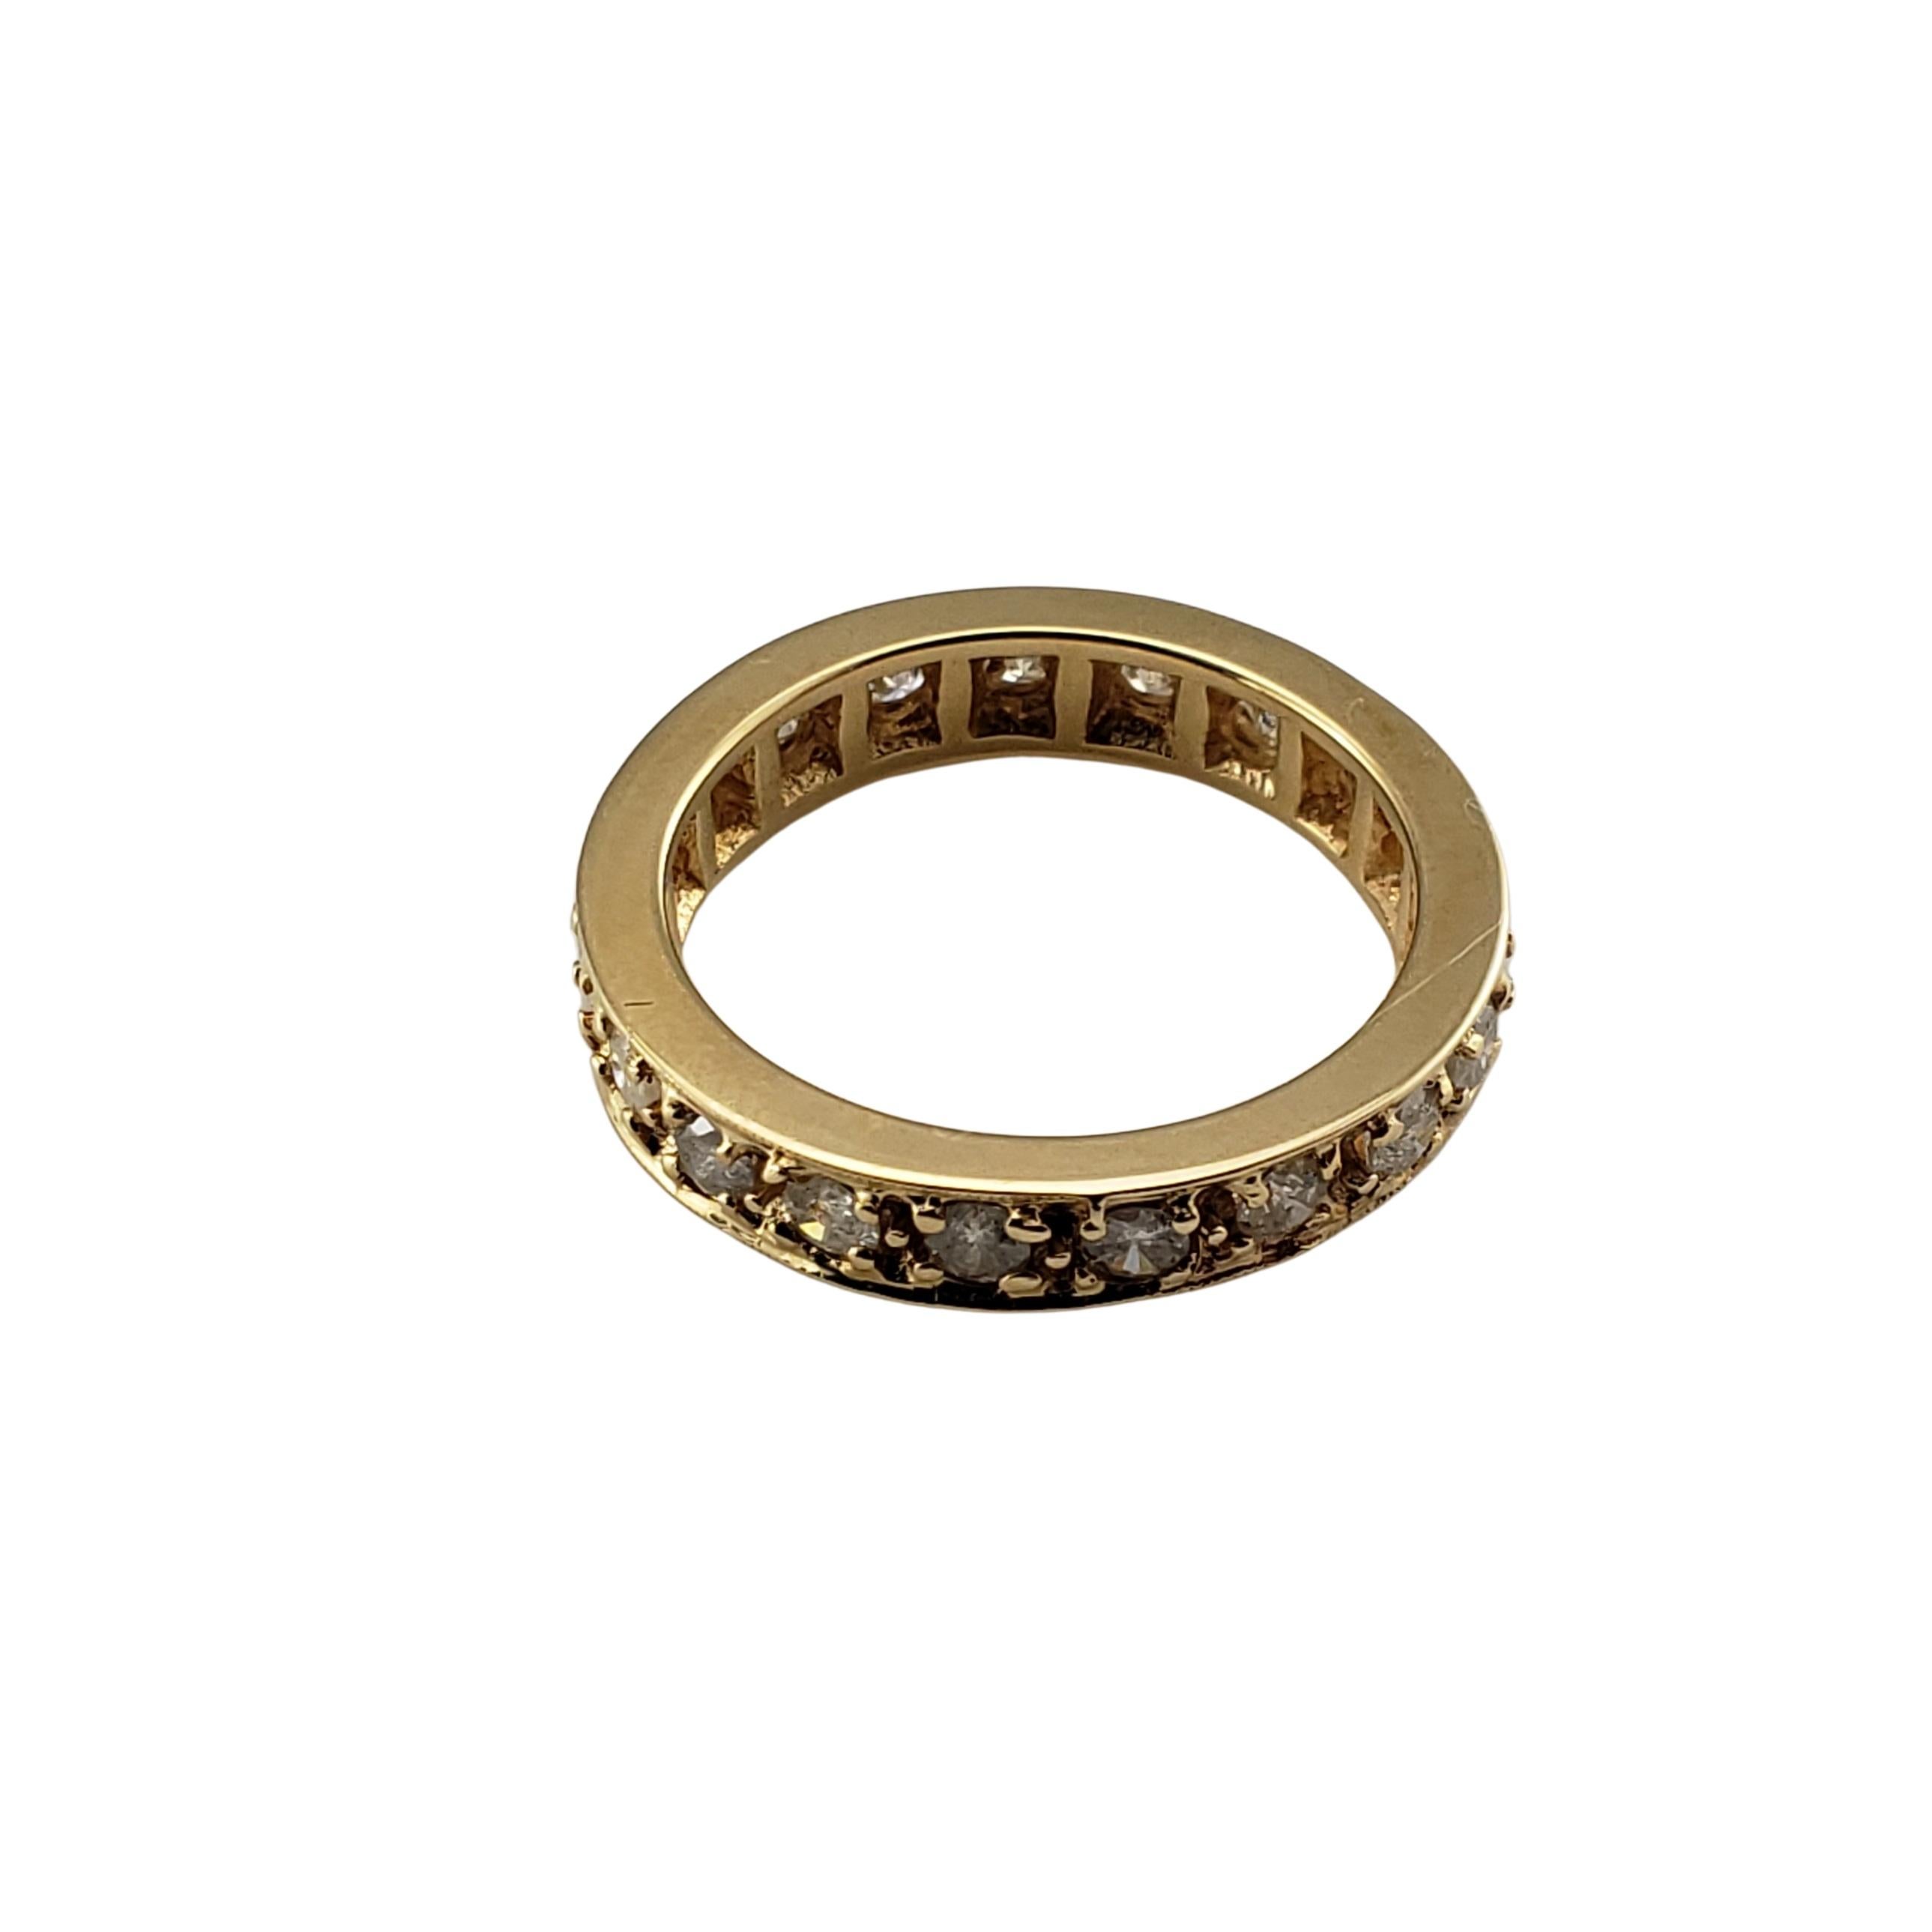 Vintage 14 Karat Yellow Gold and Diamond Wedding Band Ring Size 6-

This sparkling band features 19 round brilliant cut diamonds set in classic 14K yellow gold. Width: 4 mm.

Approximate total diamond weight: .95 ct.

Diamond color: I

Diamond